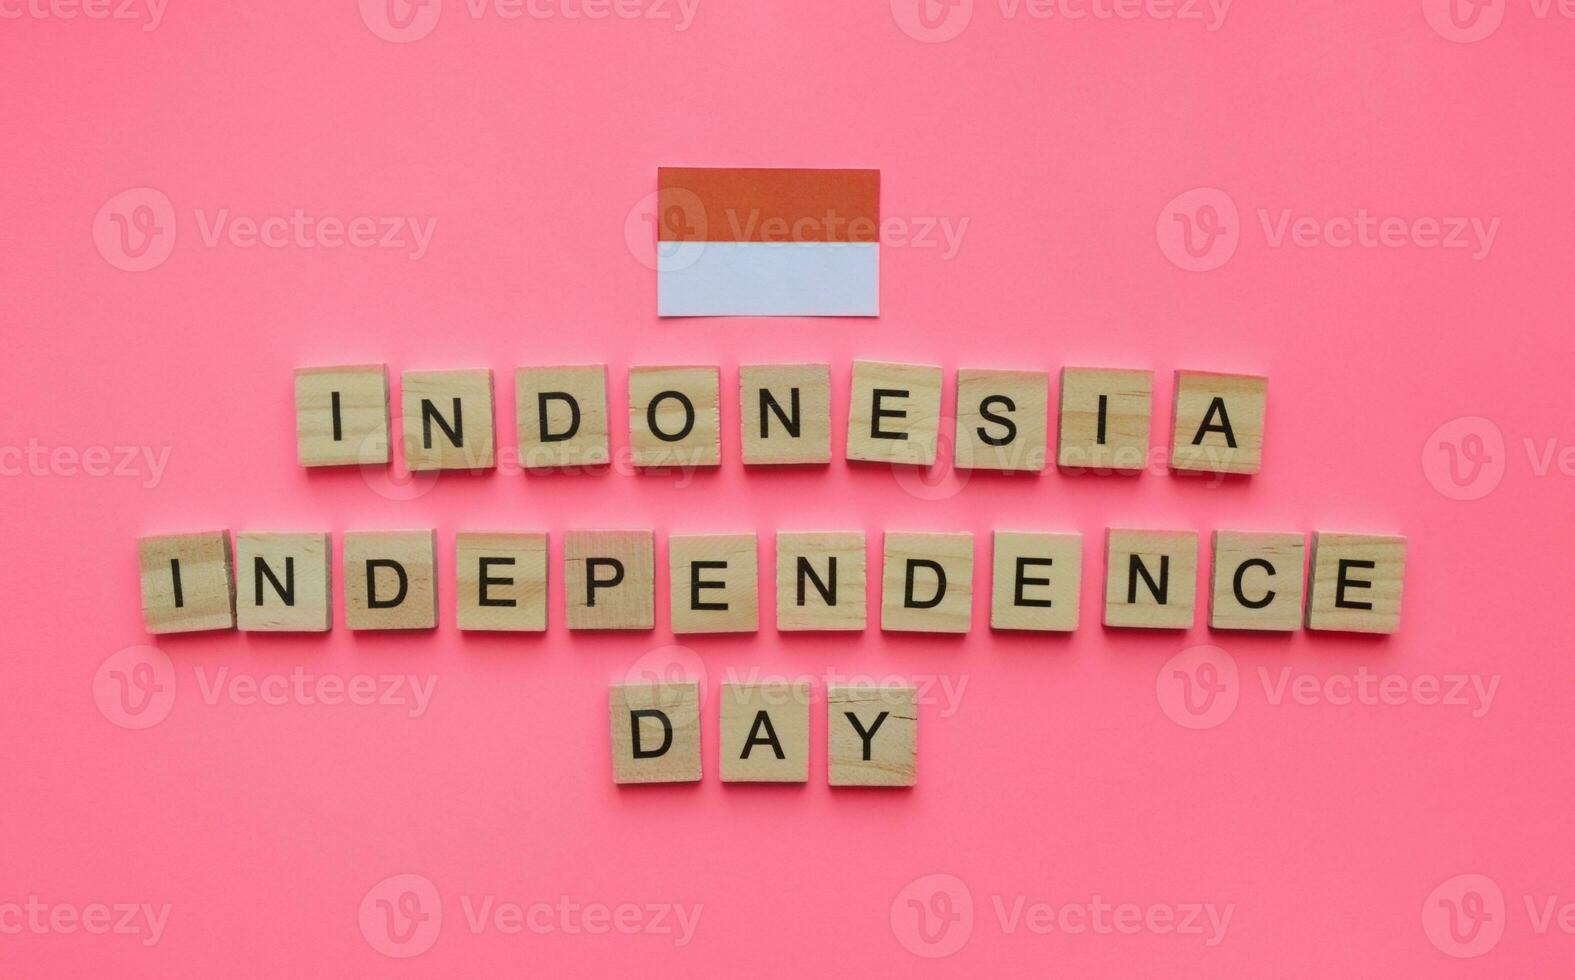 August 17, Indonesia Independence Day, flag of Indonesia, minimalistic banner with the inscription in wooden letters on a red background photo